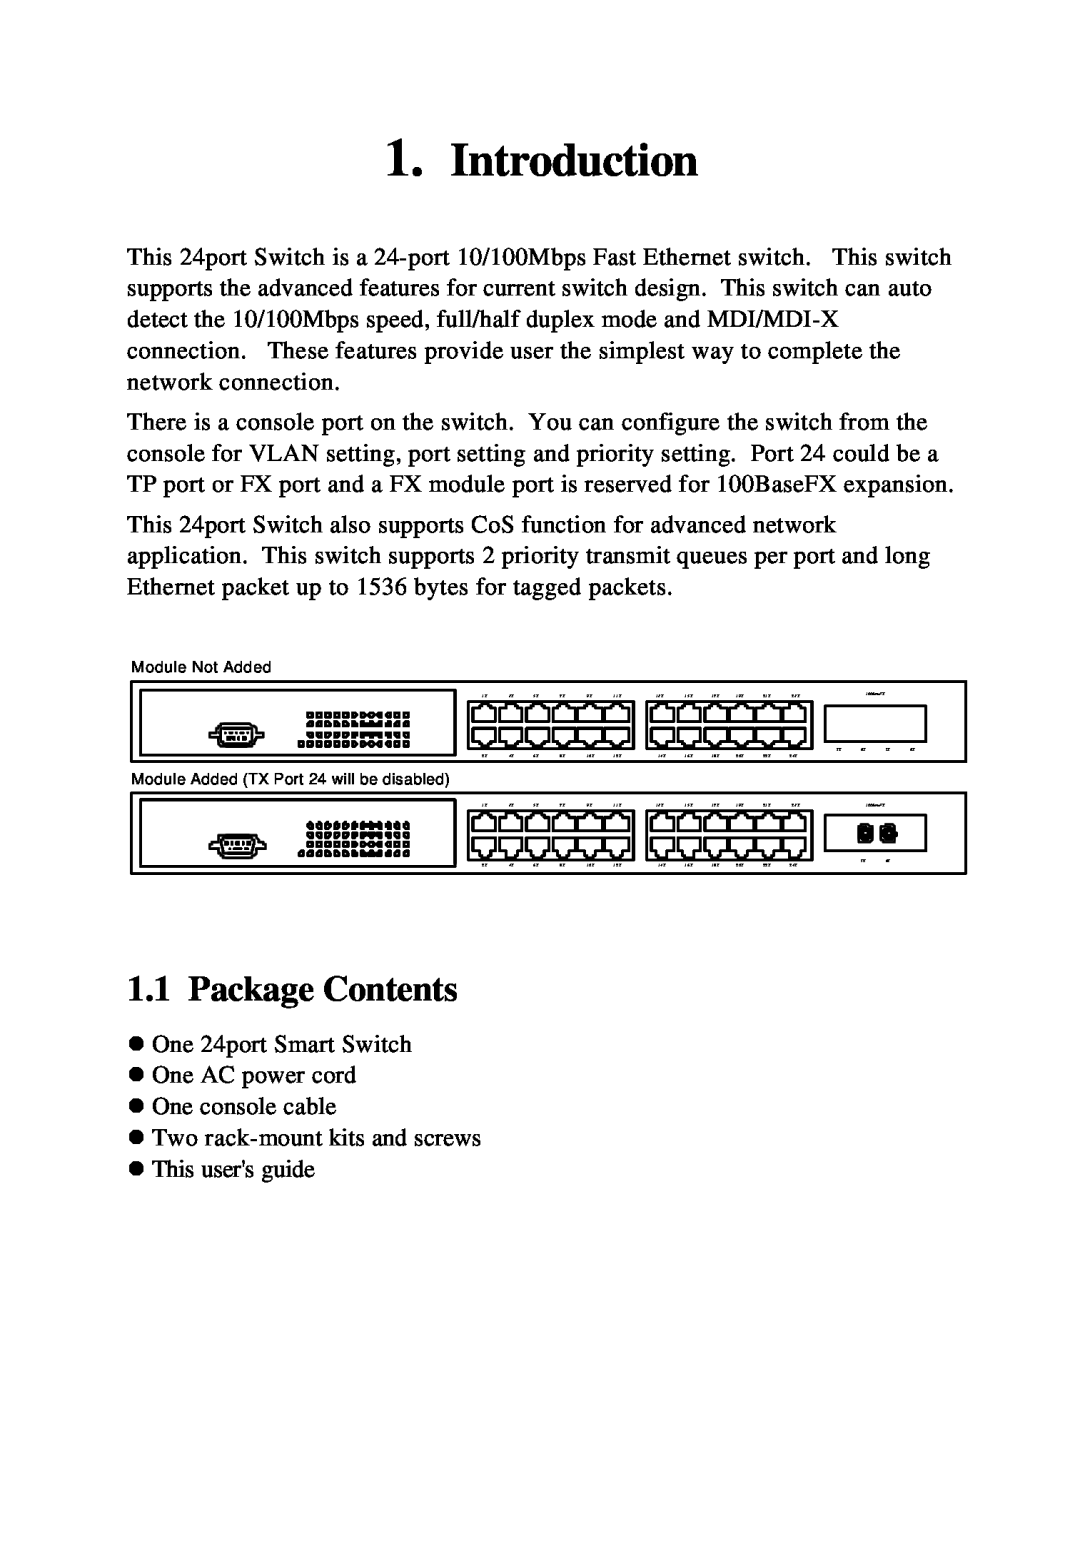 KTI Networks KS-324F manual Introduction, Package Contents 